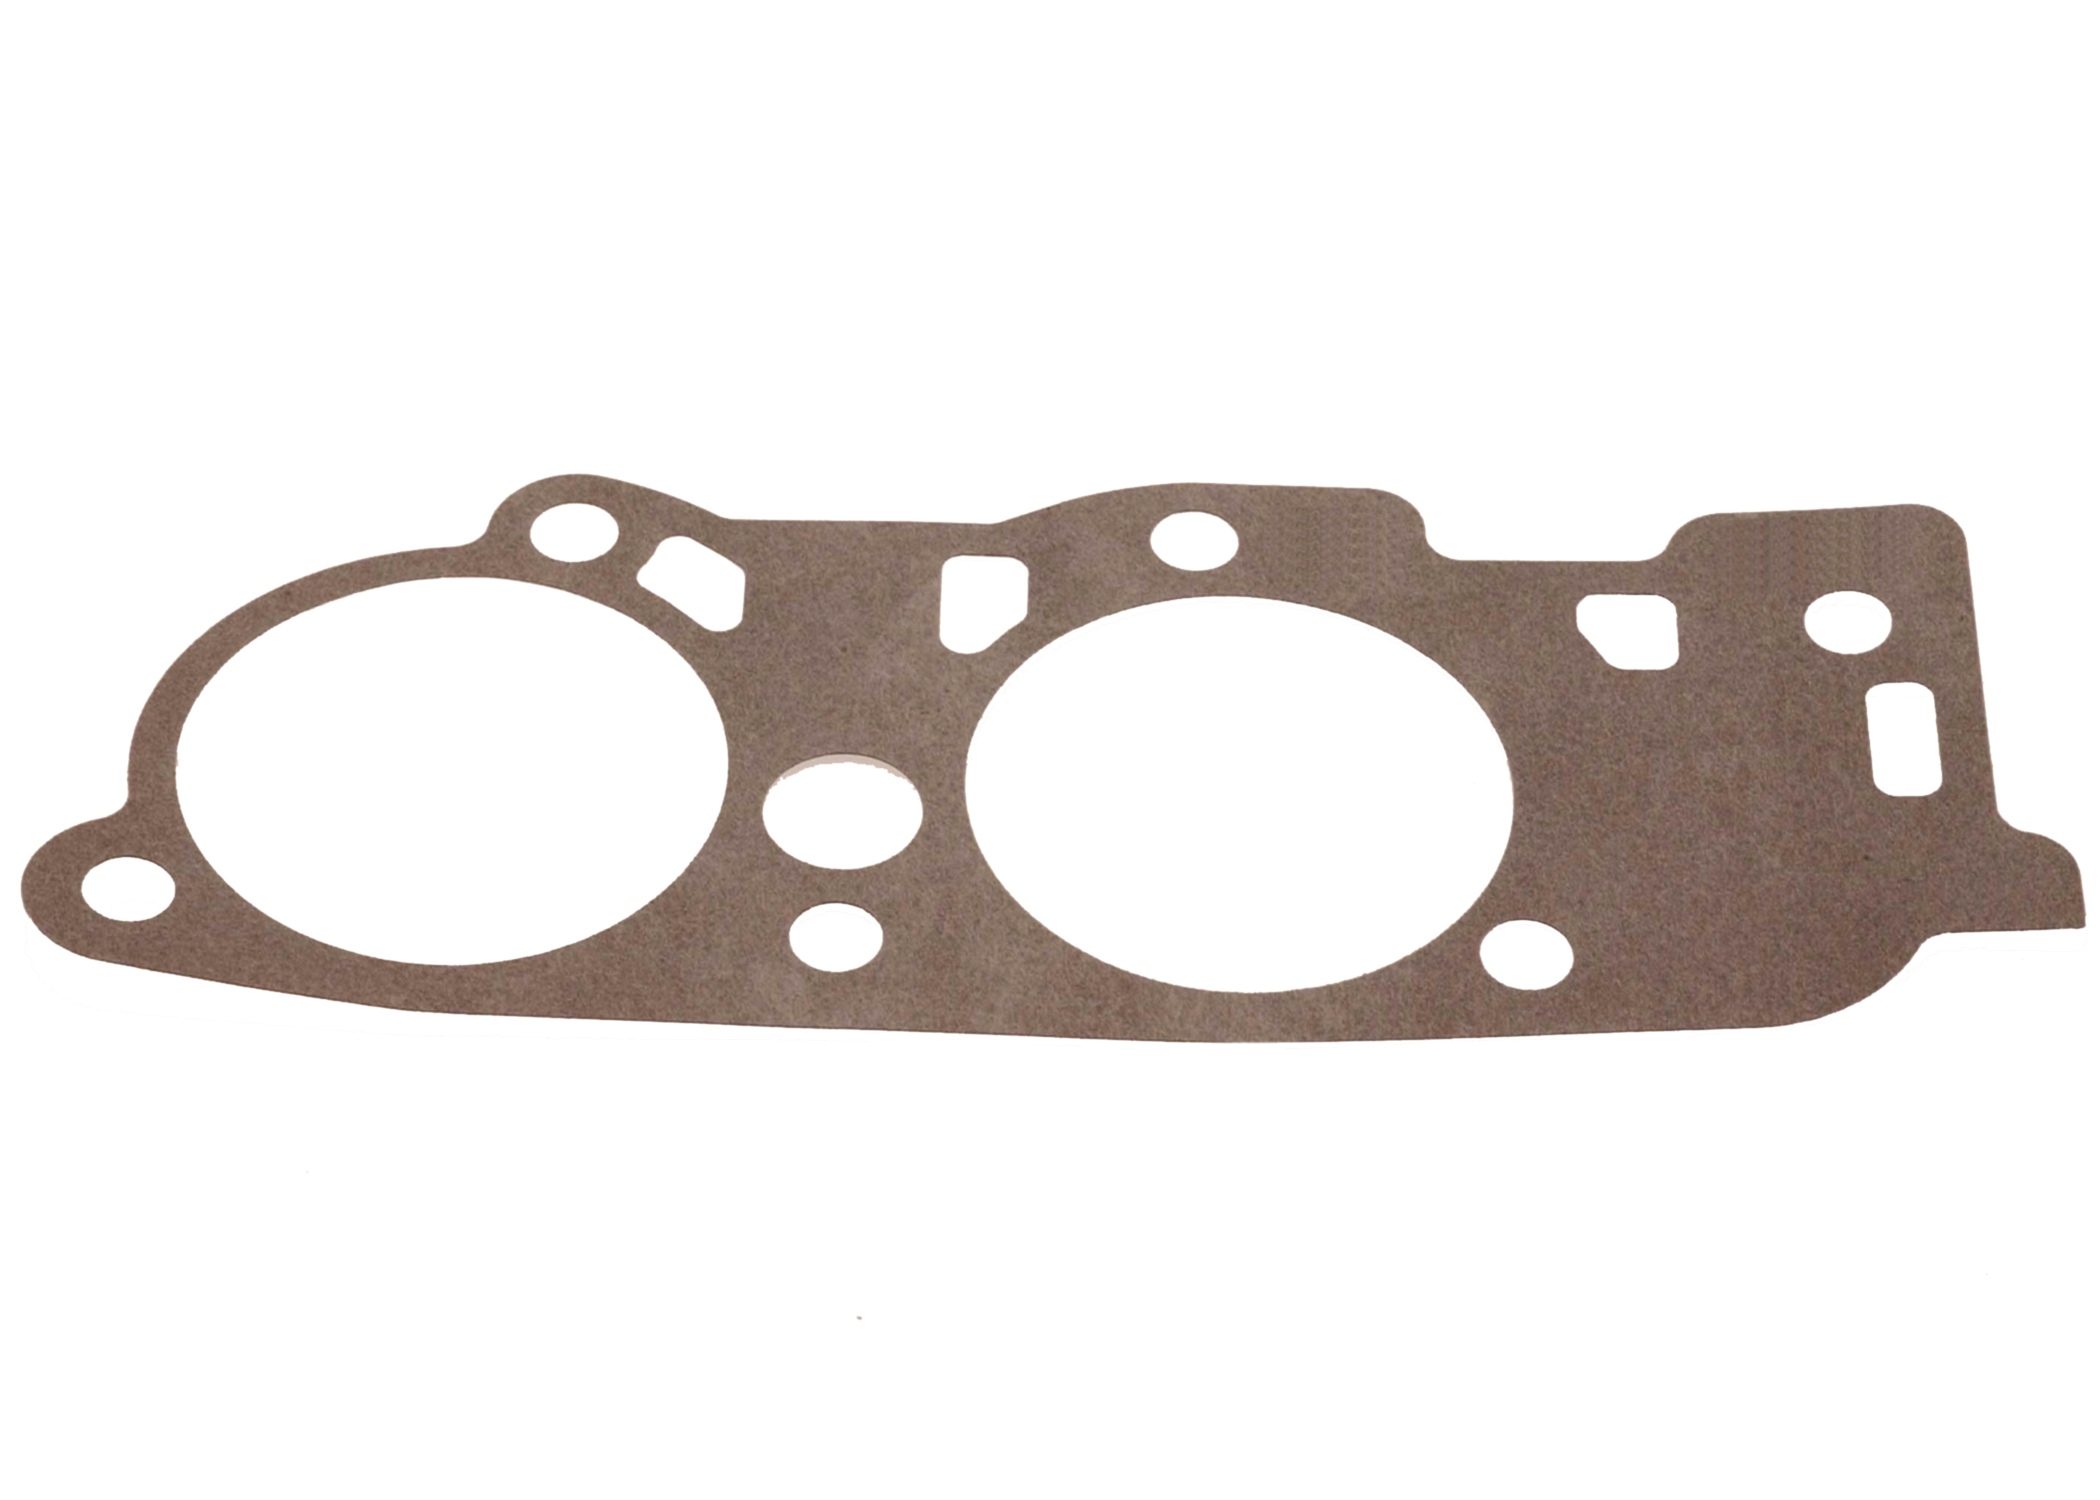 GM GENUINE PARTS - Automatic Transmission Accumulator Cover Spacer Plate Gasket - GMP 8661829